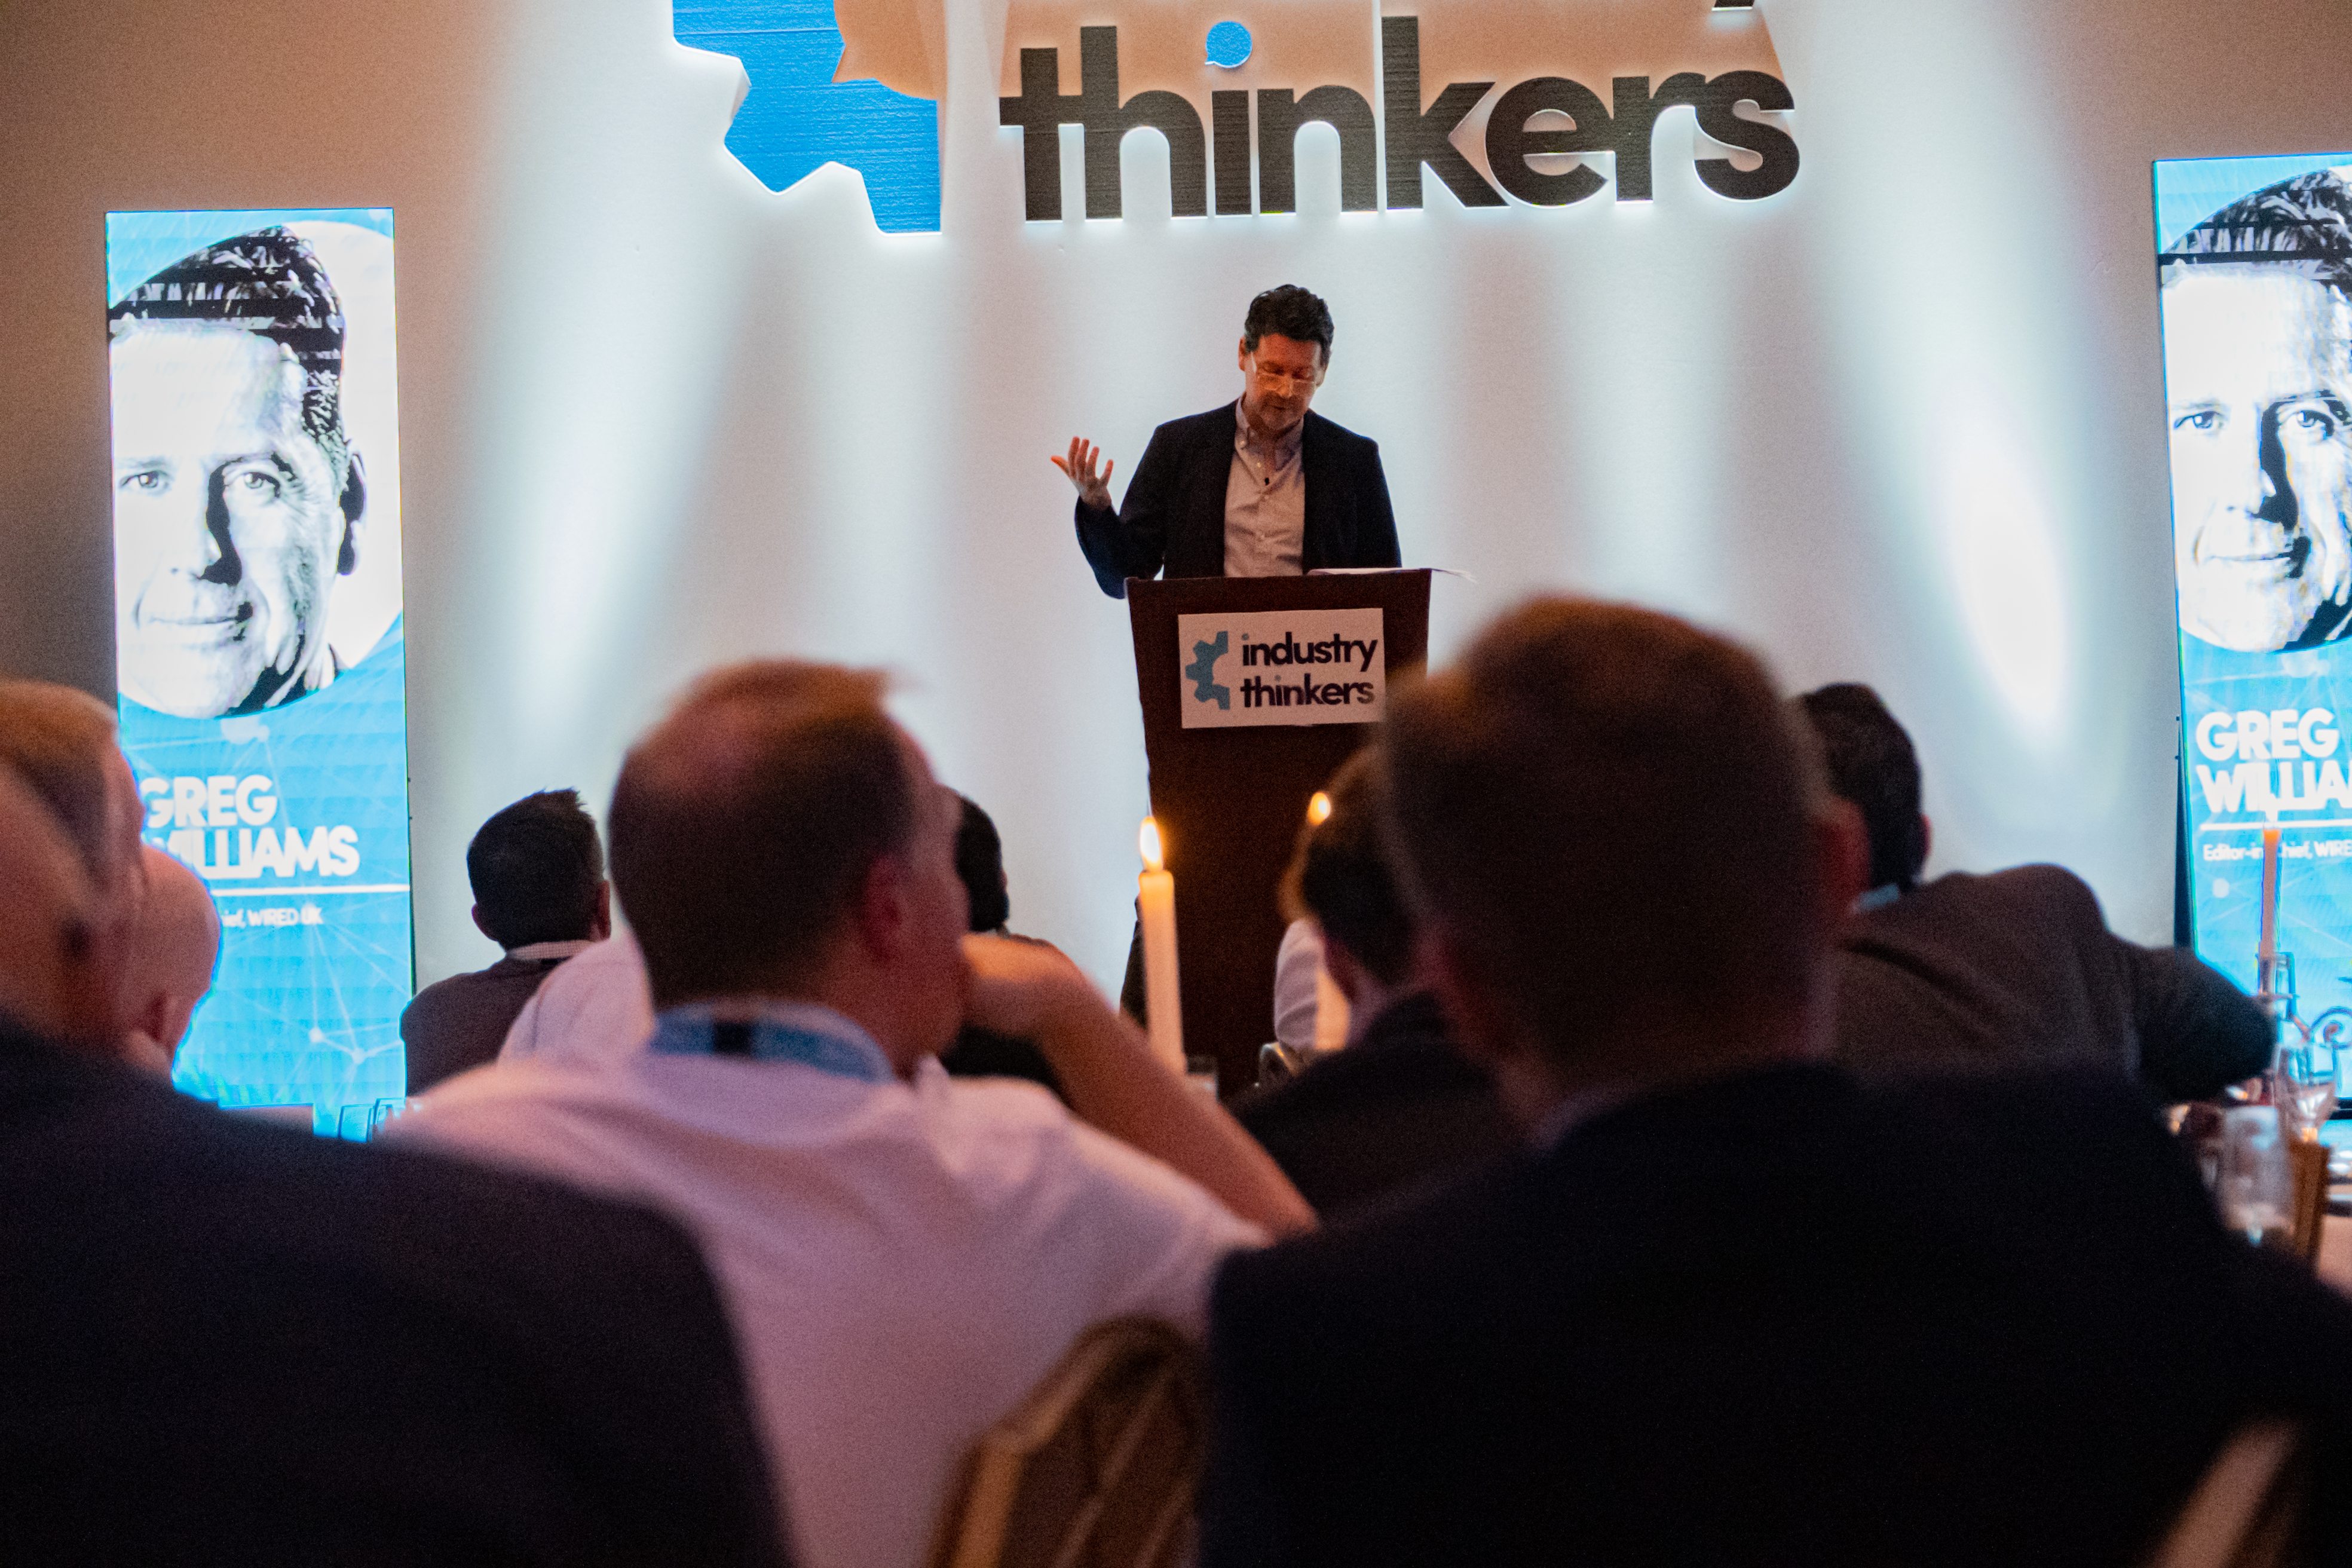 WIRED UK's Greg Williams at the Industry Thinkers Dinner - February 2022